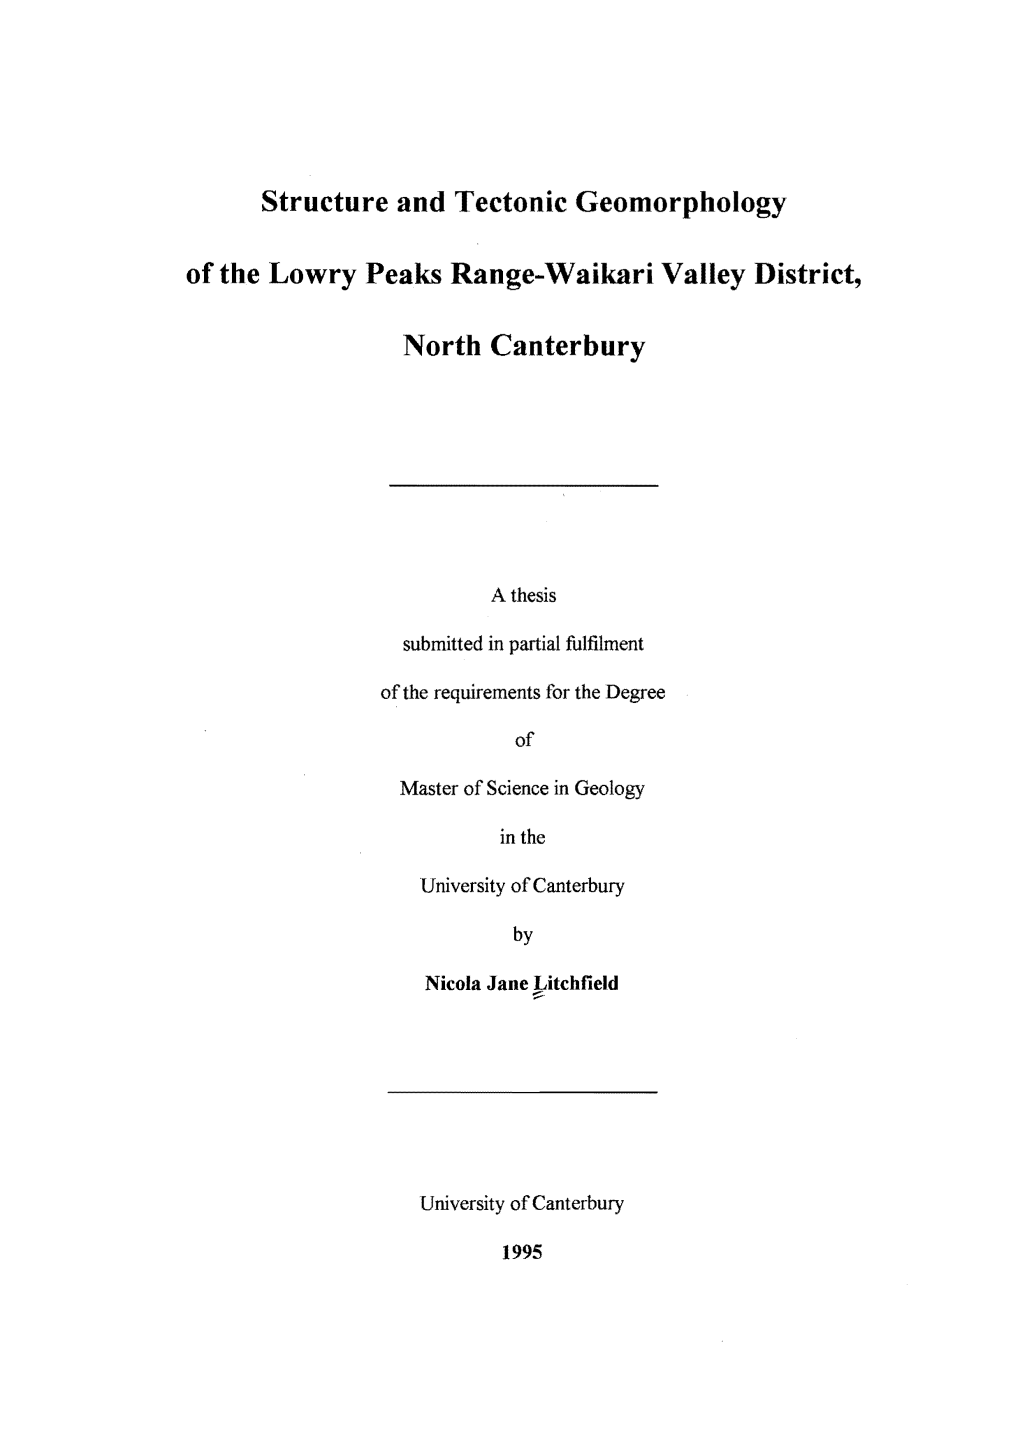 Structure and Tectonic Geomorphology of the Lowry Peaks Range-Waikari Valley District